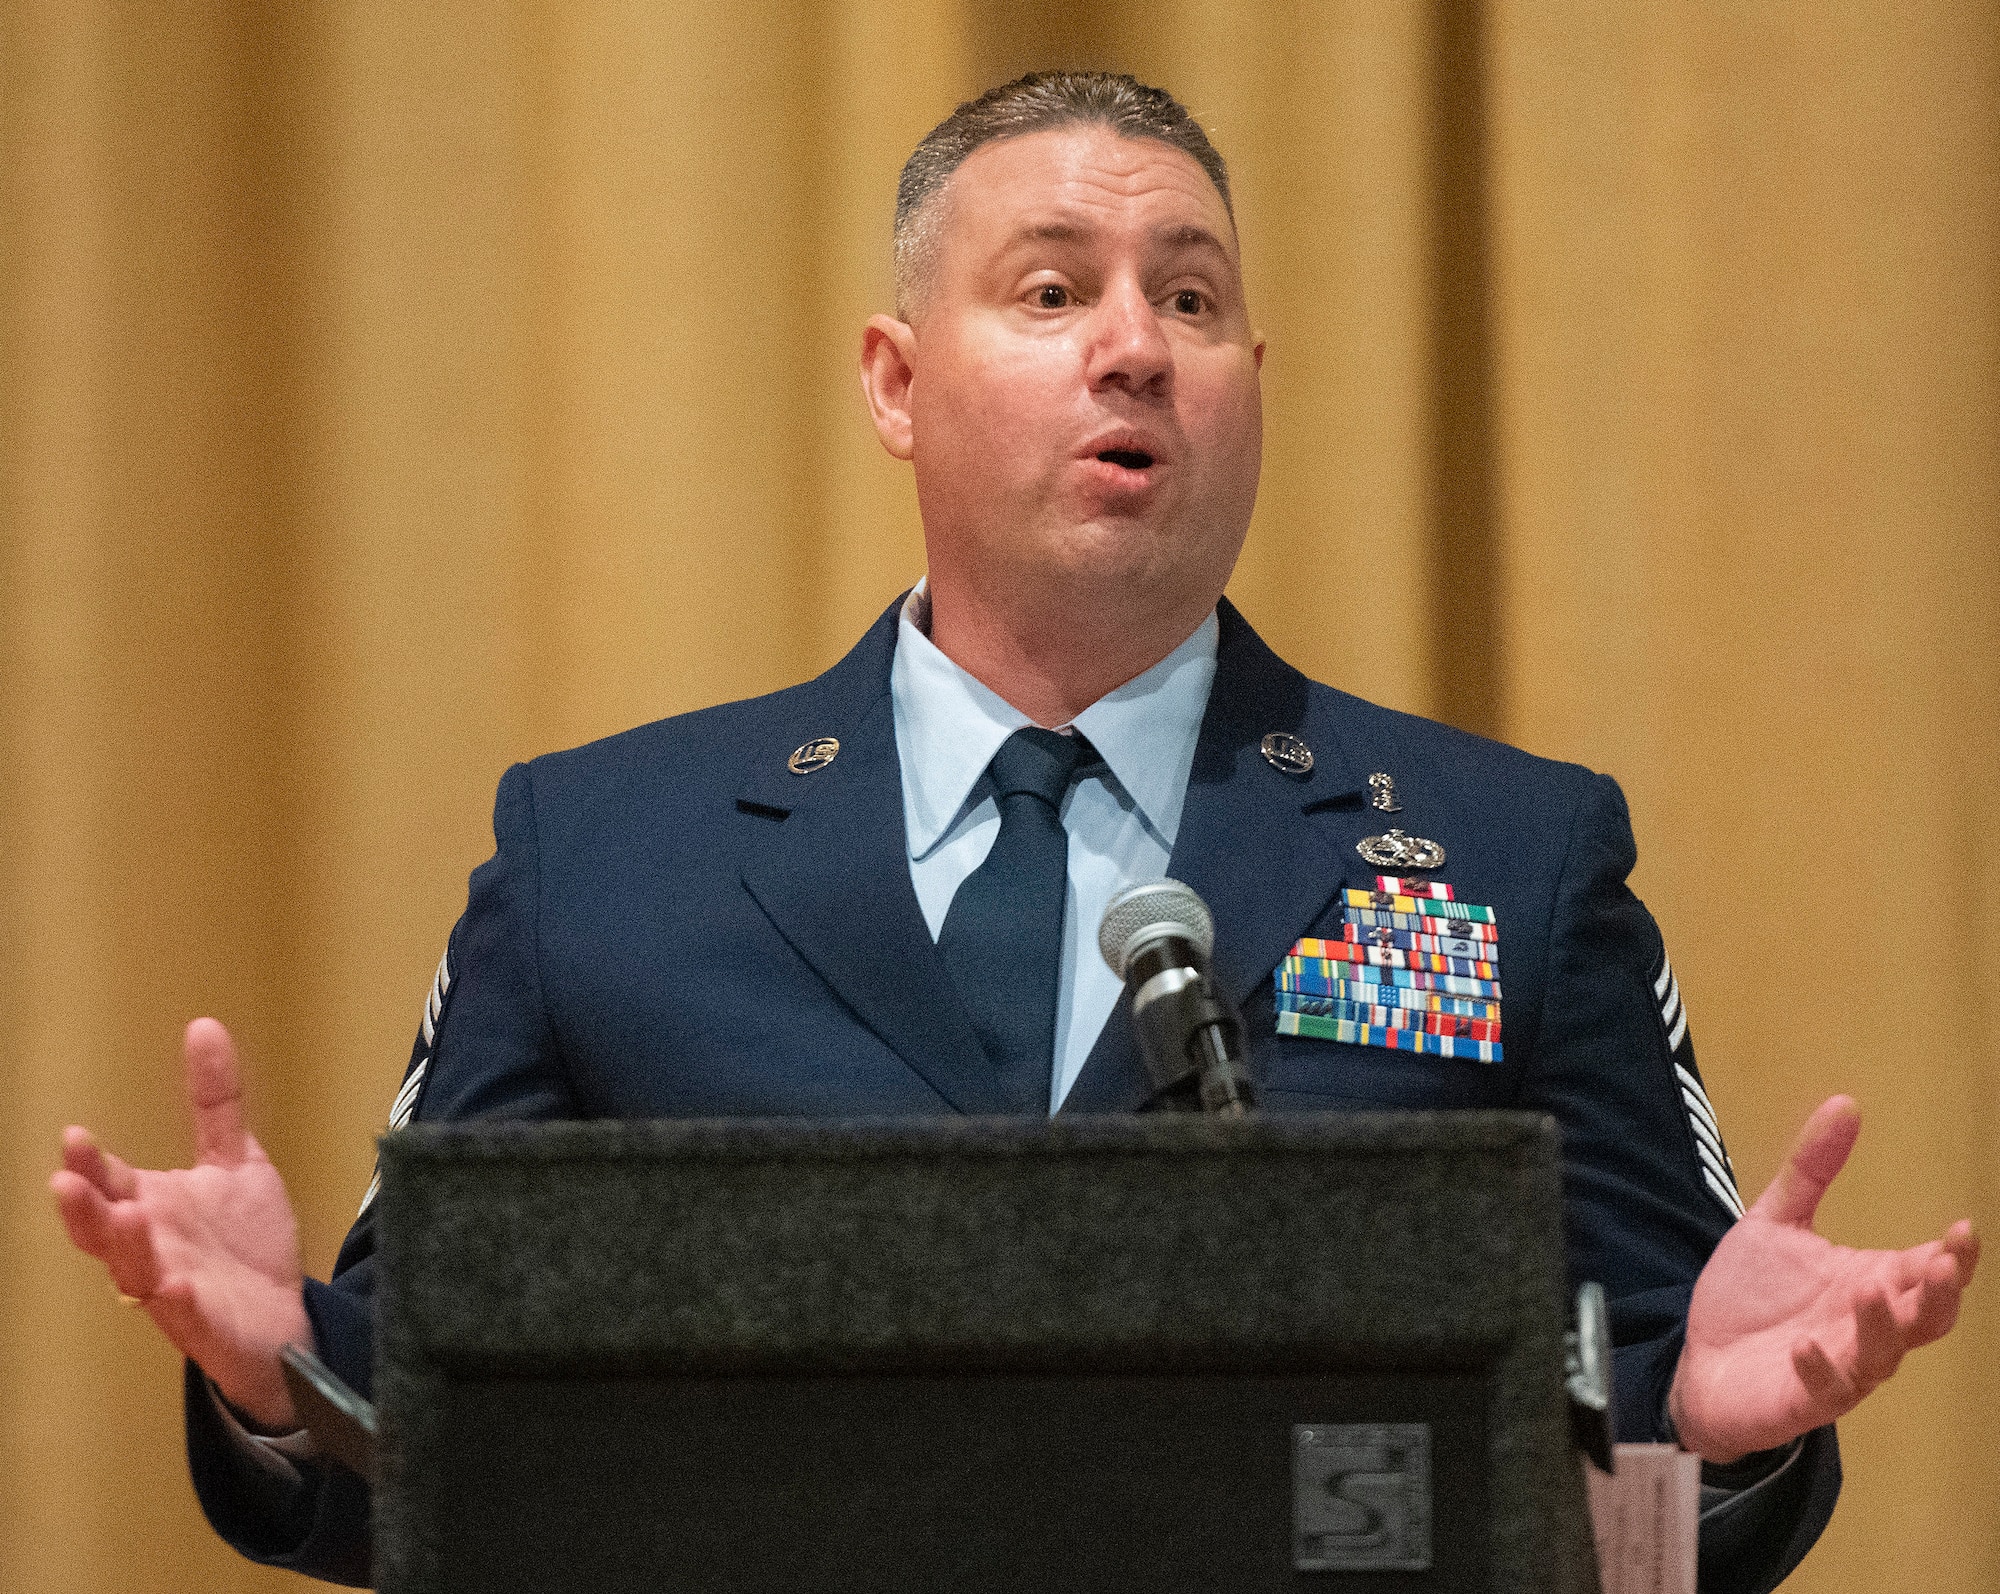 Chief Master Sgt. Erik Robbins, U.S. Air Force School of Aerospace Medicine’s Occupational and Environmental Health Division superintendent, delivers the commencement address during the Community College of the Air Force spring graduation ceremony May 26, 2021, in the theater at Wright-Patterson Air Force Base, Ohio. Robbins urged the graduates to continue investing in their education. (U.S. Air Force photo by R.J. Oriez)